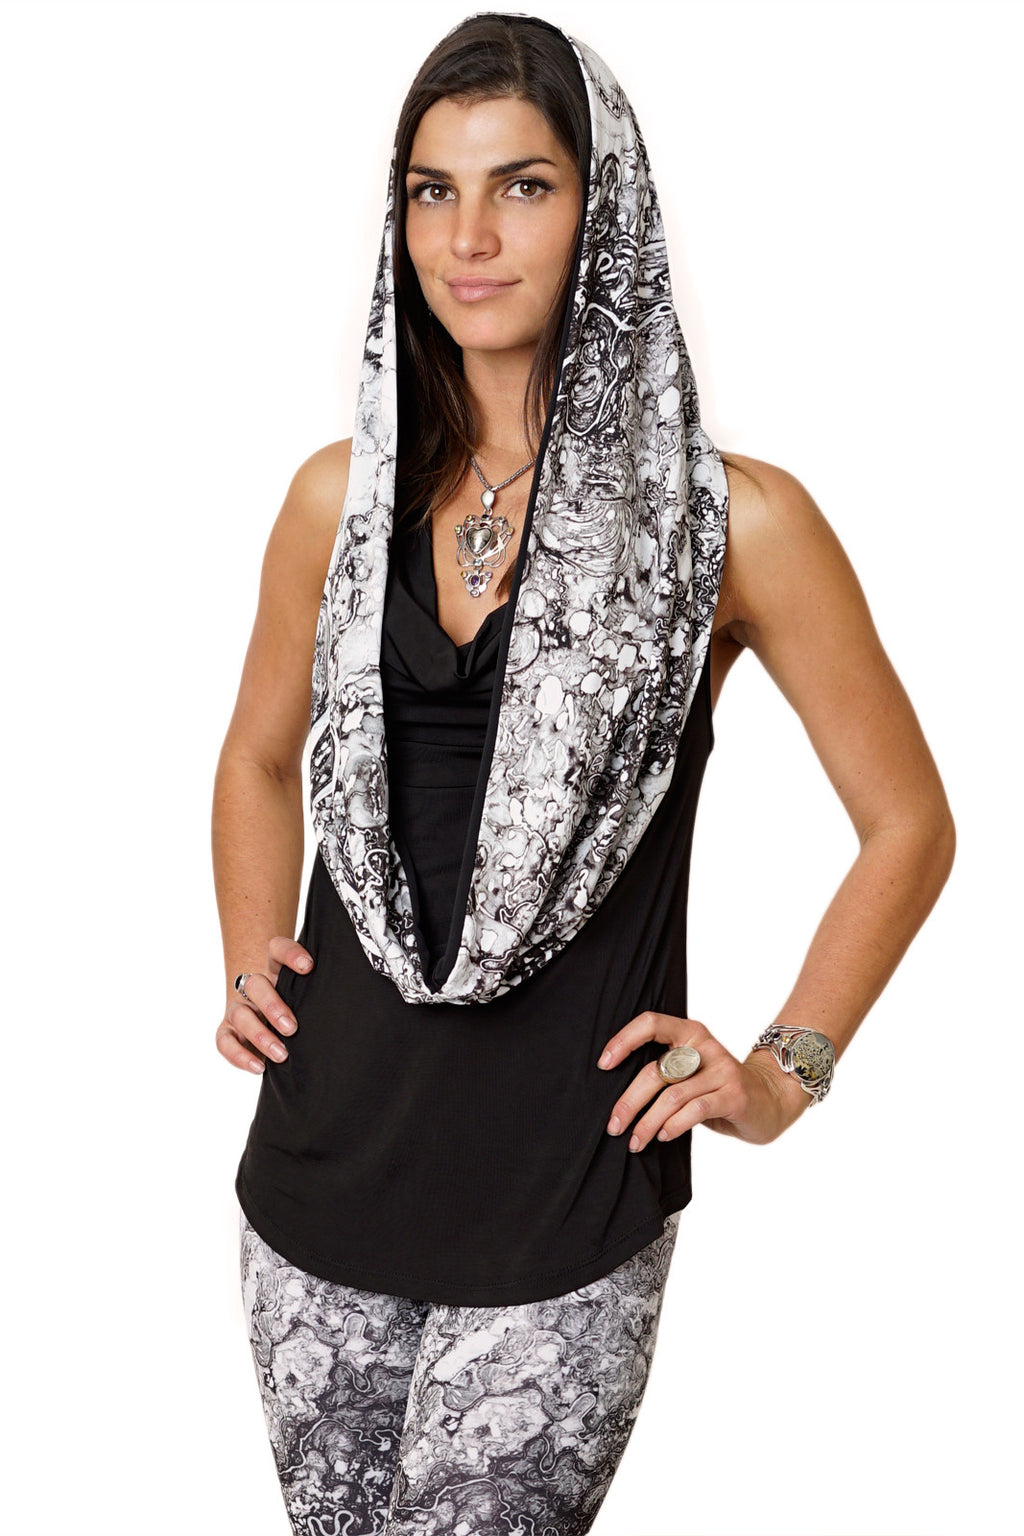 Infinity Scarf-Google Earth Image-Landscape Clothing-Mayn River